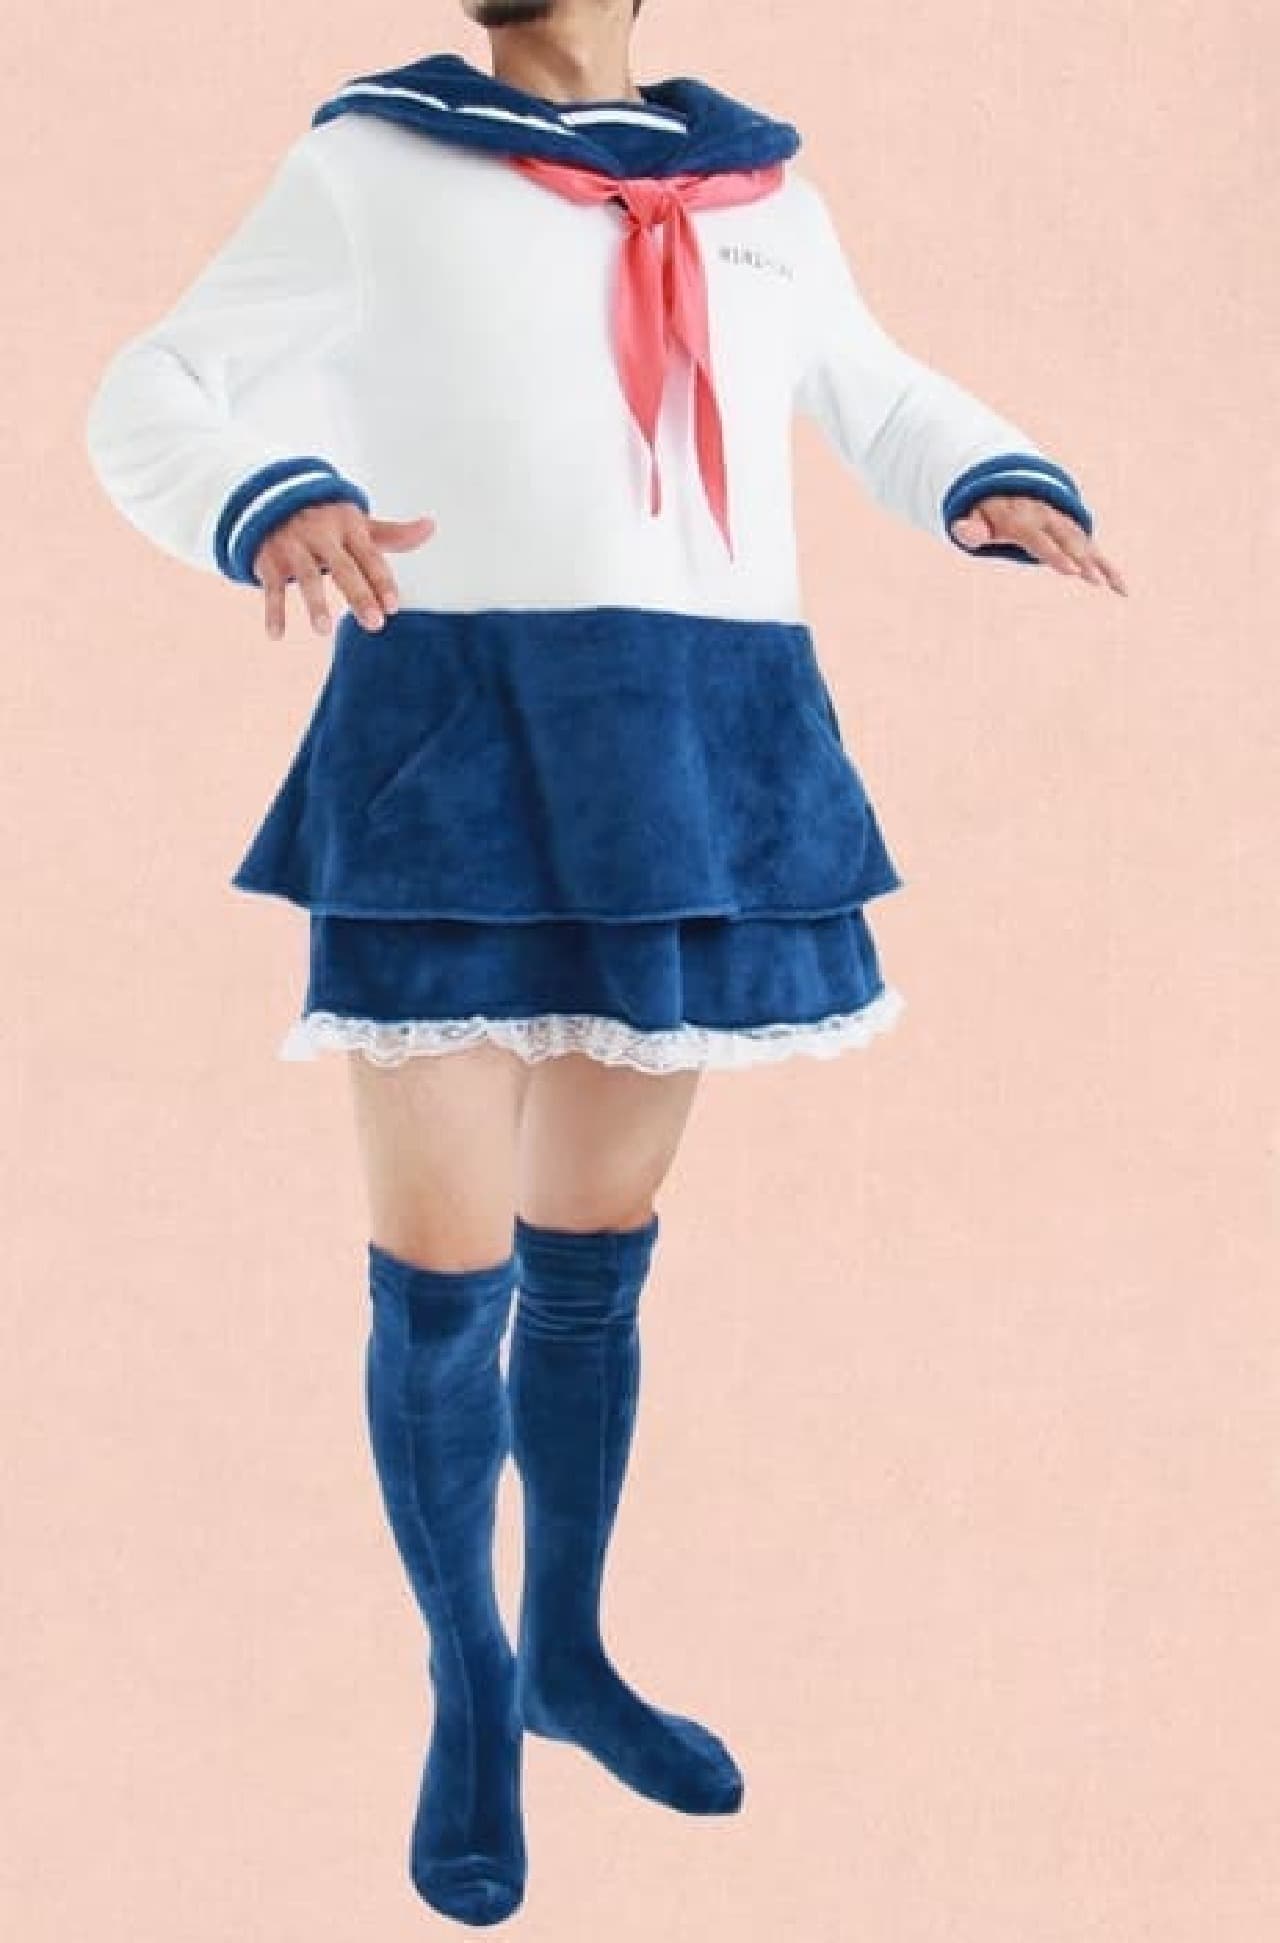 I feel like a high school girl wearing a sailor suit for the first time in "Boxera" and for some reason I feel like a ballerina?